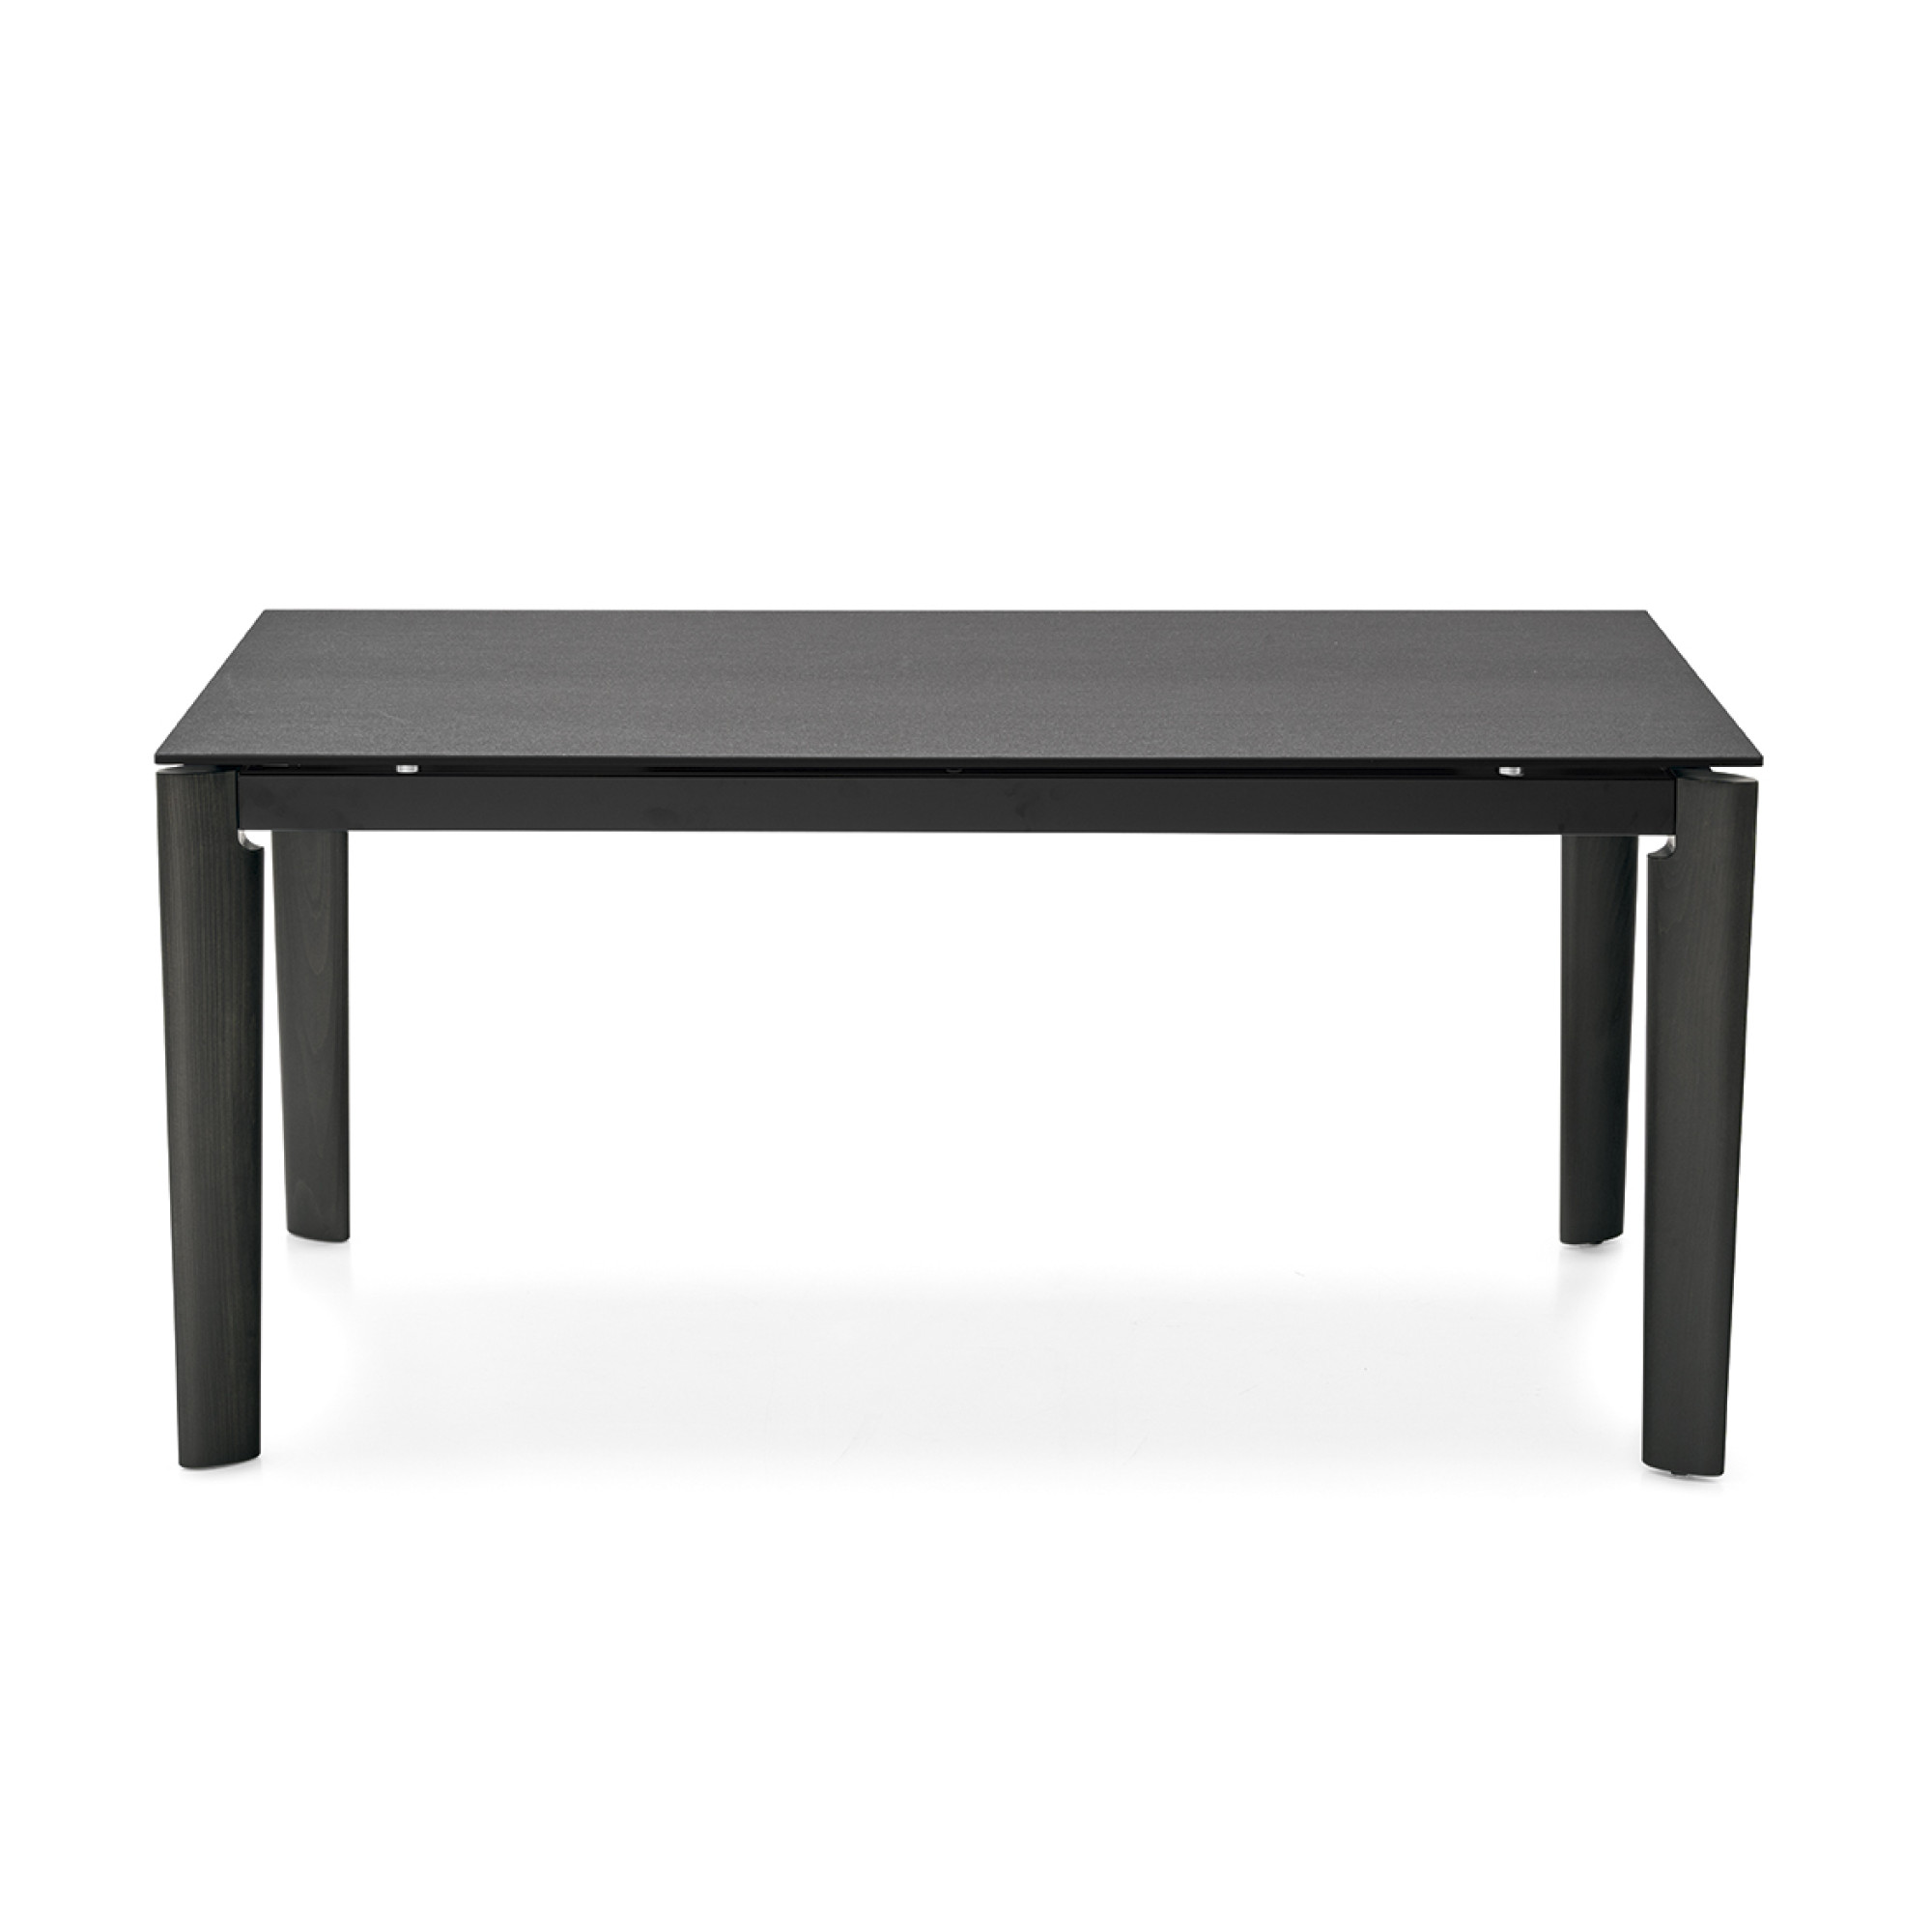 LORD WOOD CB/4832-R | Extending Tables | Tables | CONNUBIA - Masonionline